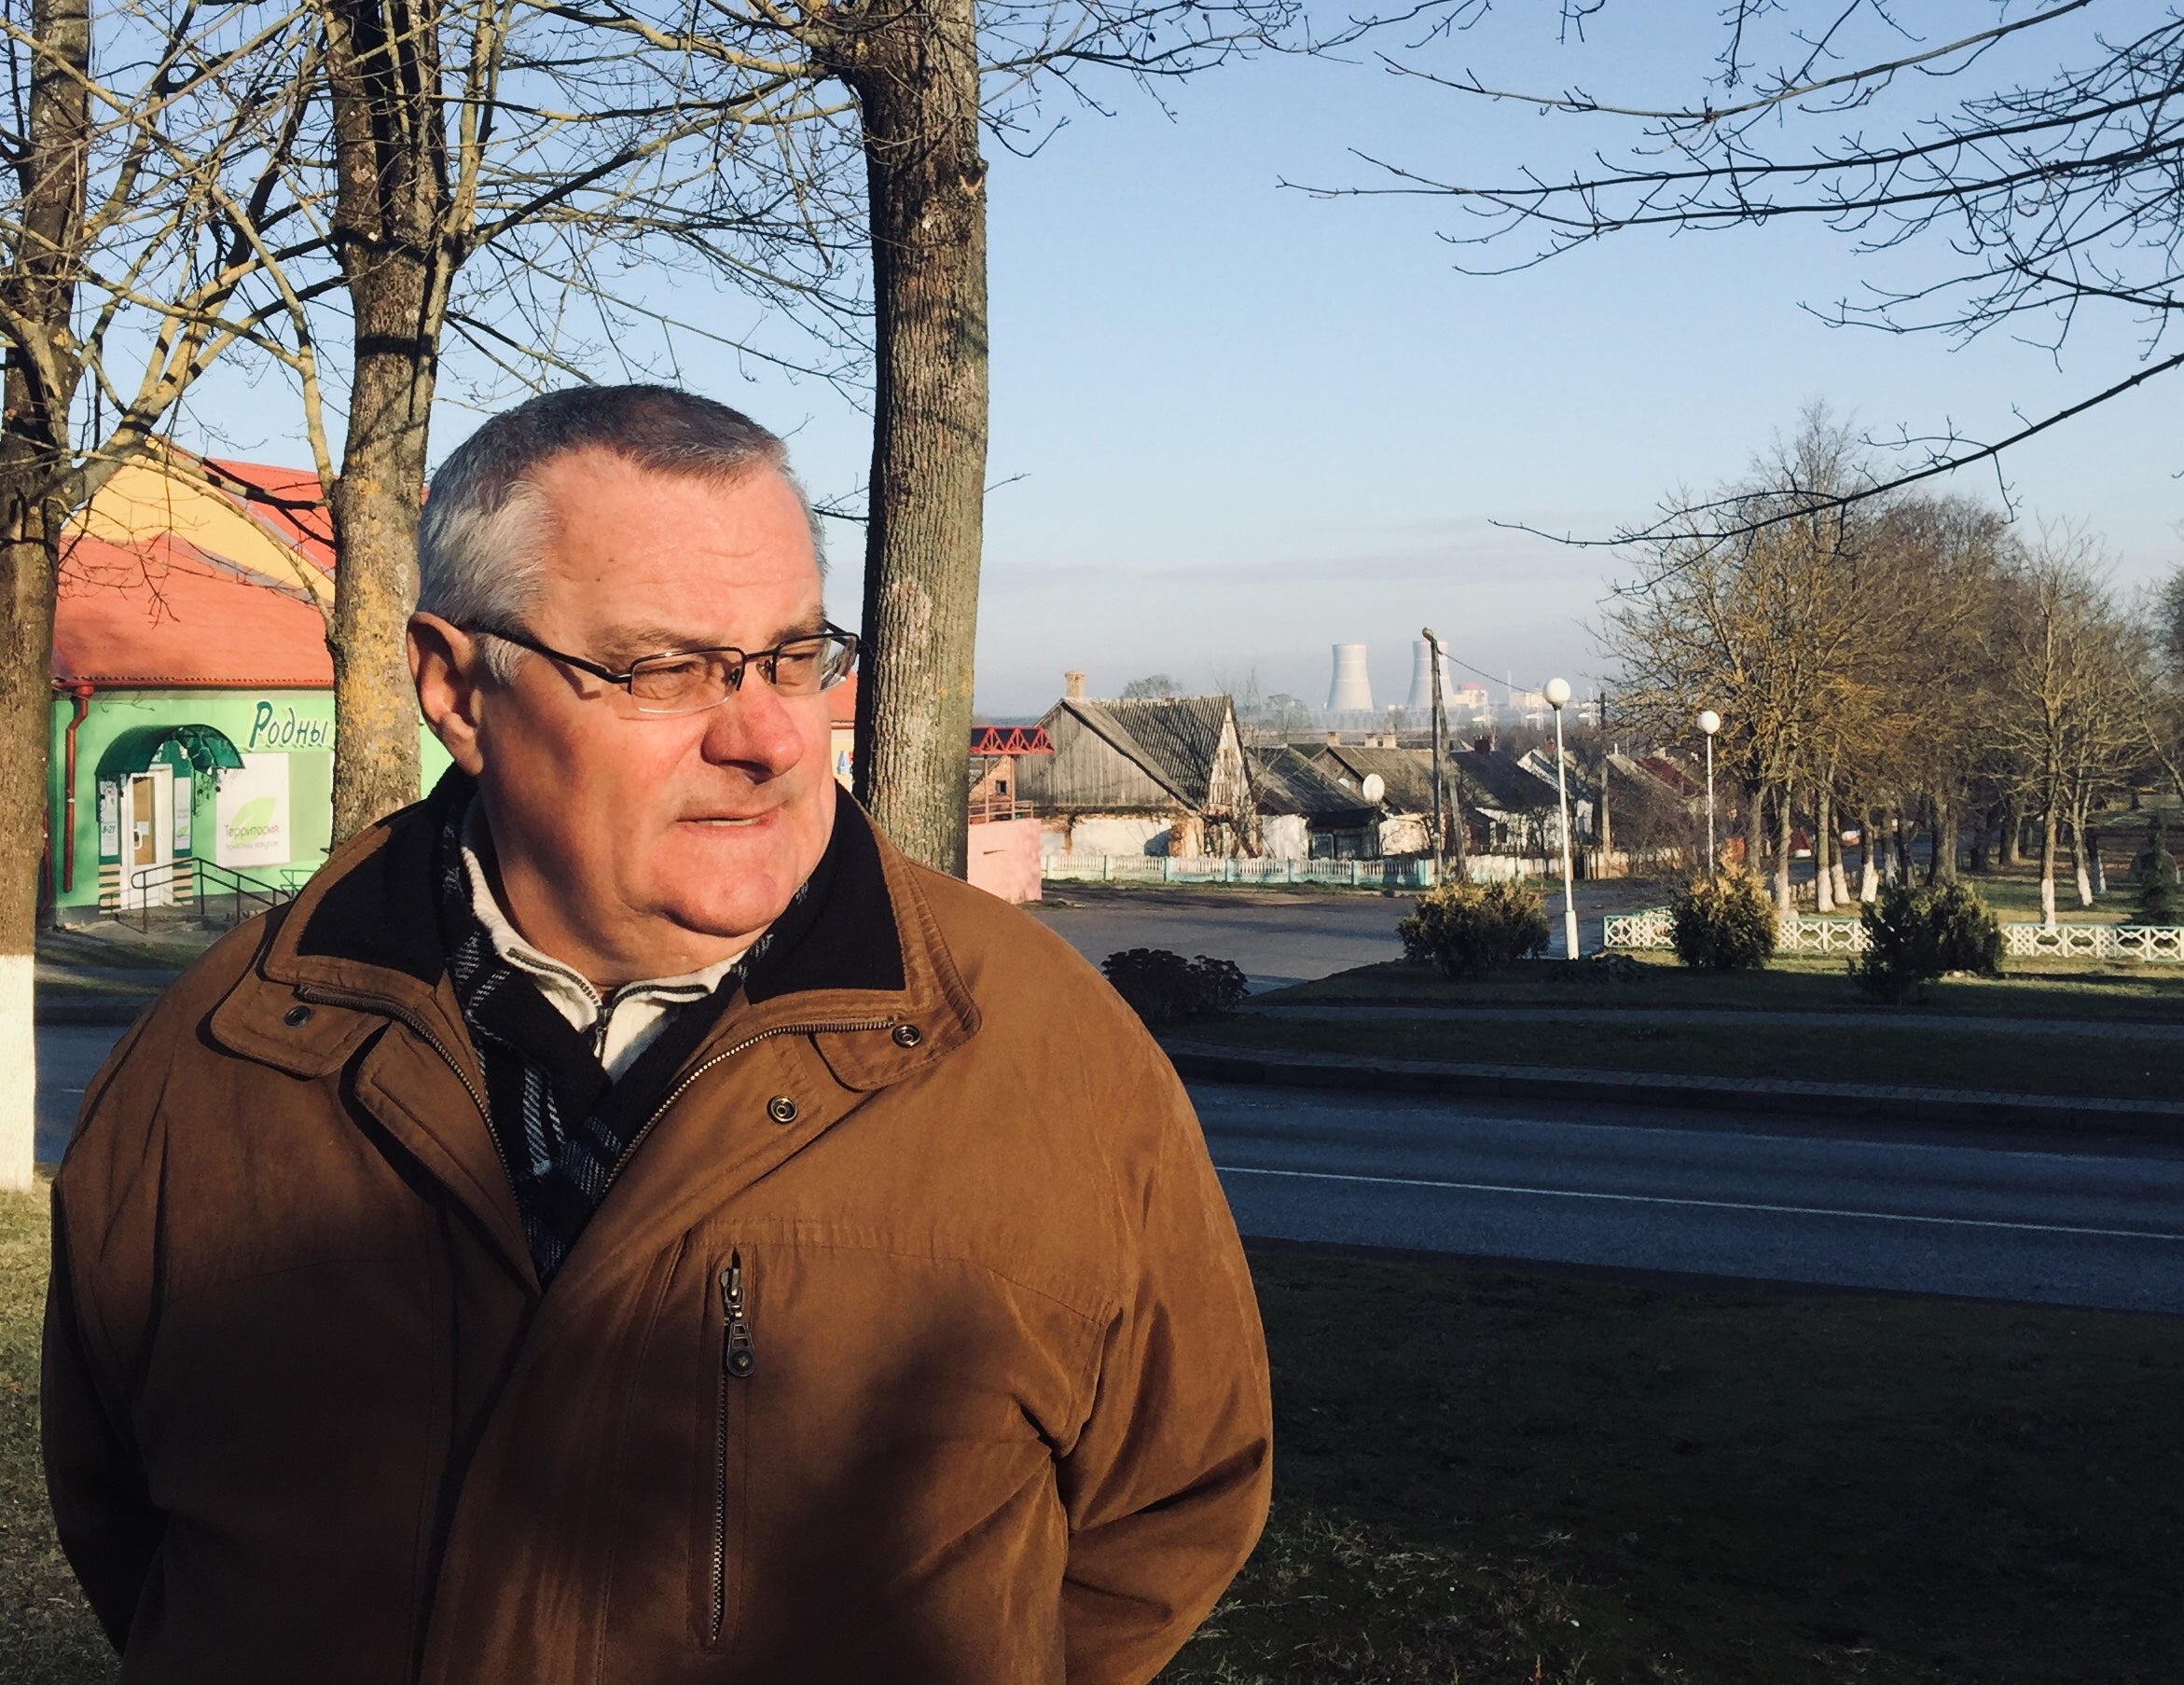 Anti-nuclear activist Nikolai Ulasevich at his home in Vornyany, three miles away from the new nuclear plant